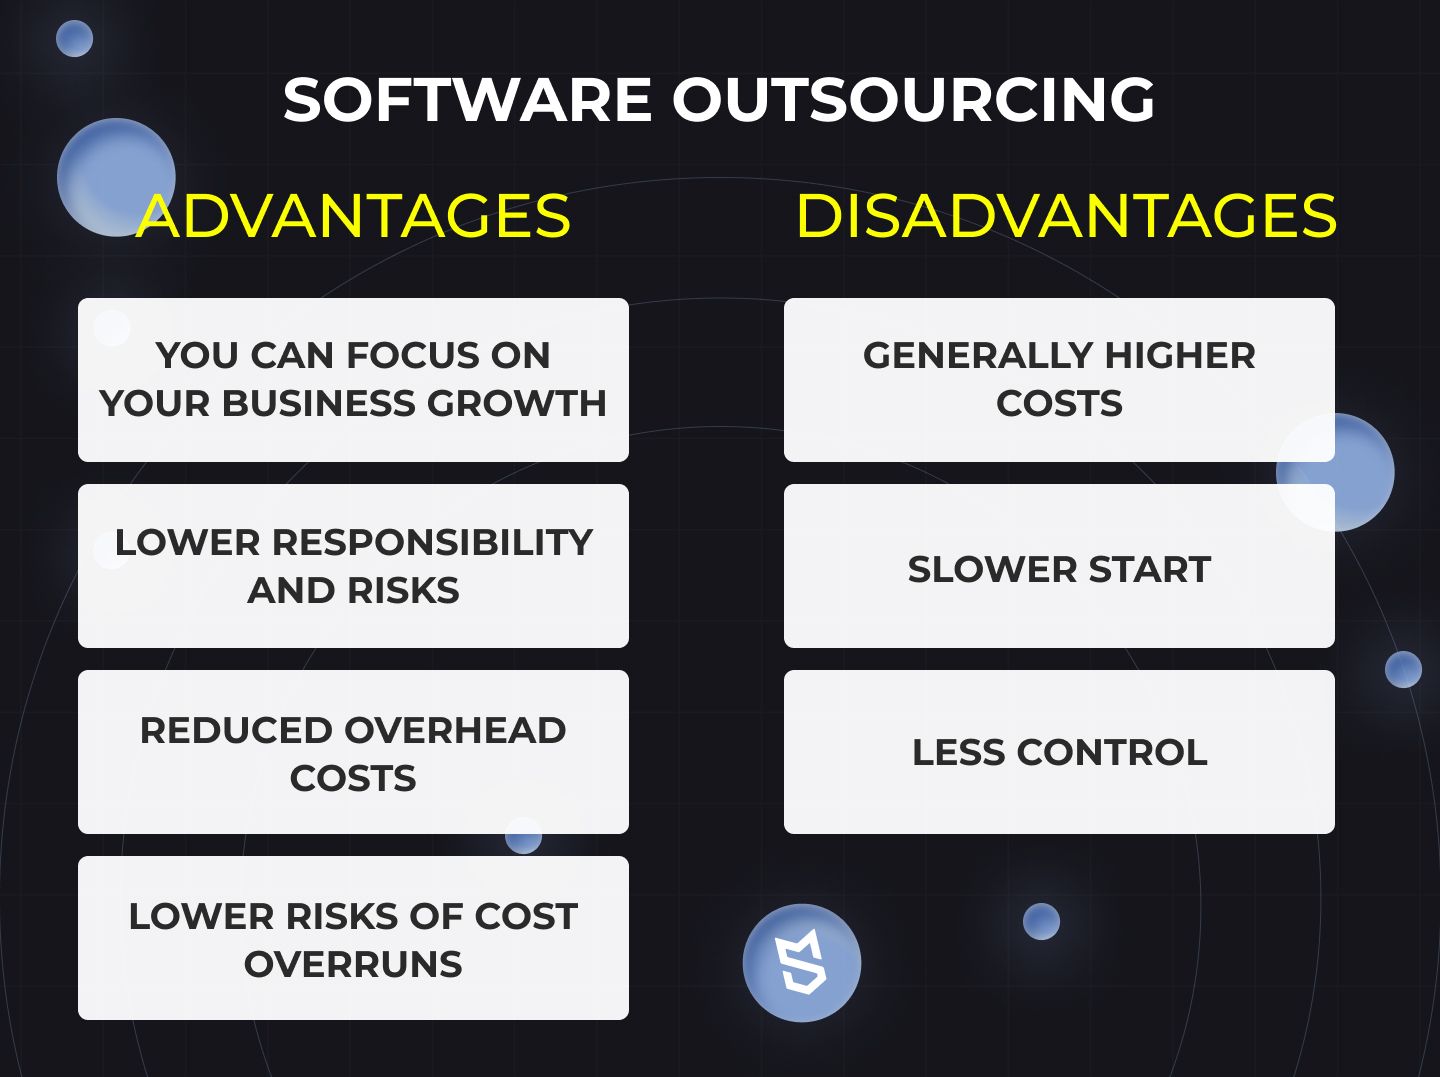 Advantages and disadvantages of software outsourcing